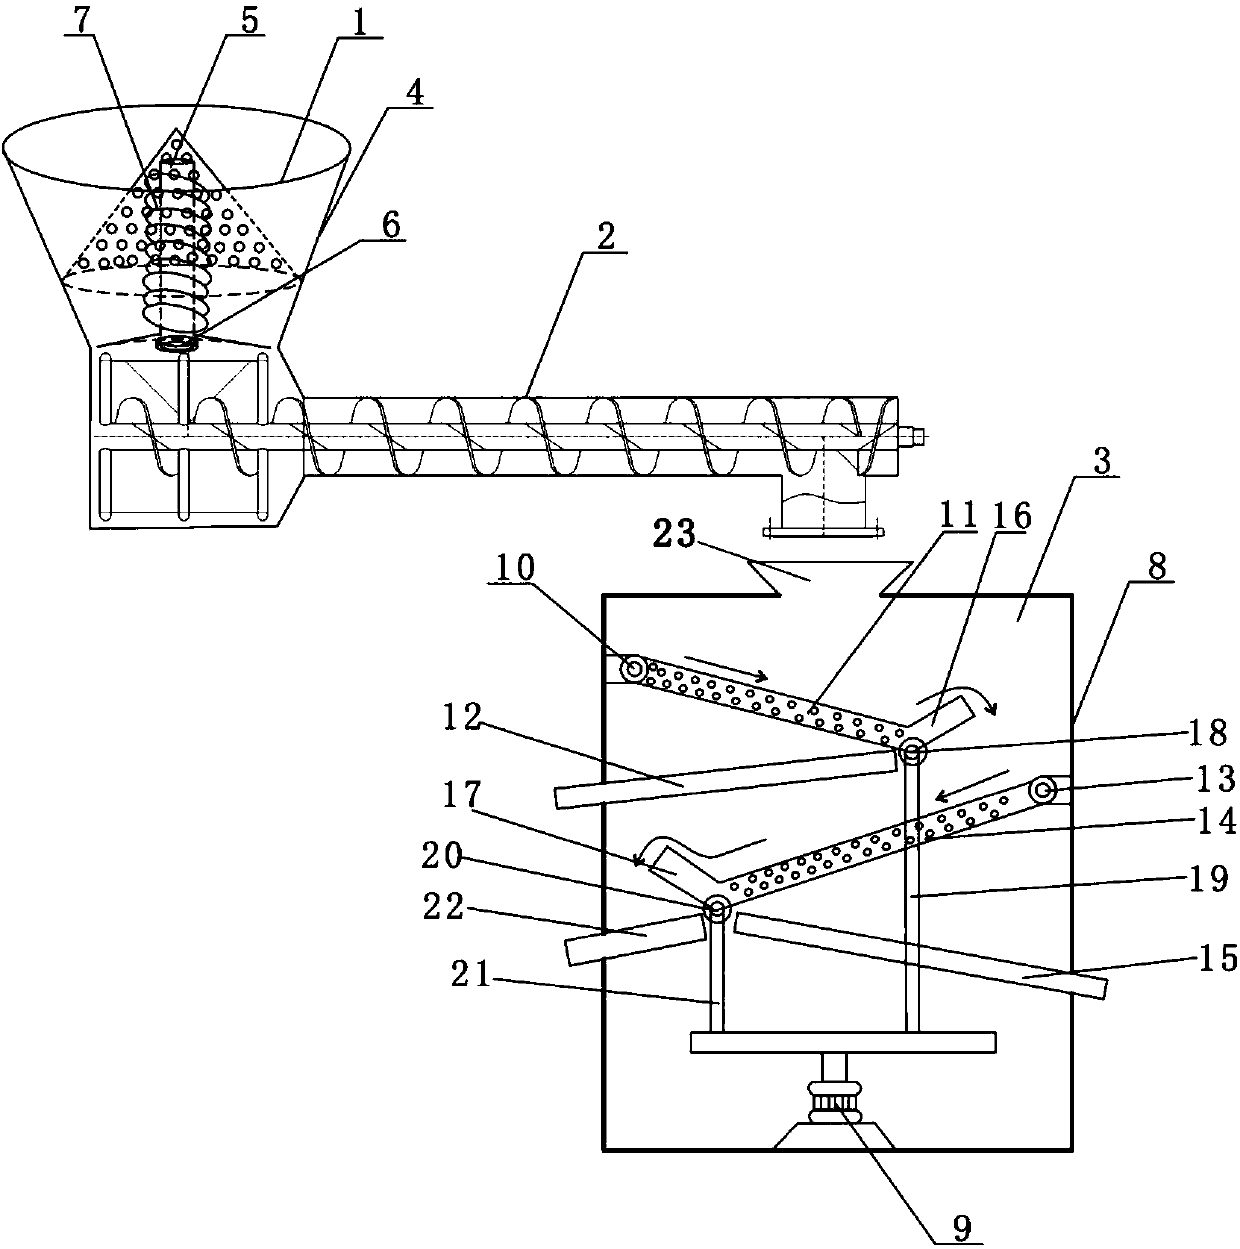 Granulated feed drying and sorting integrated device